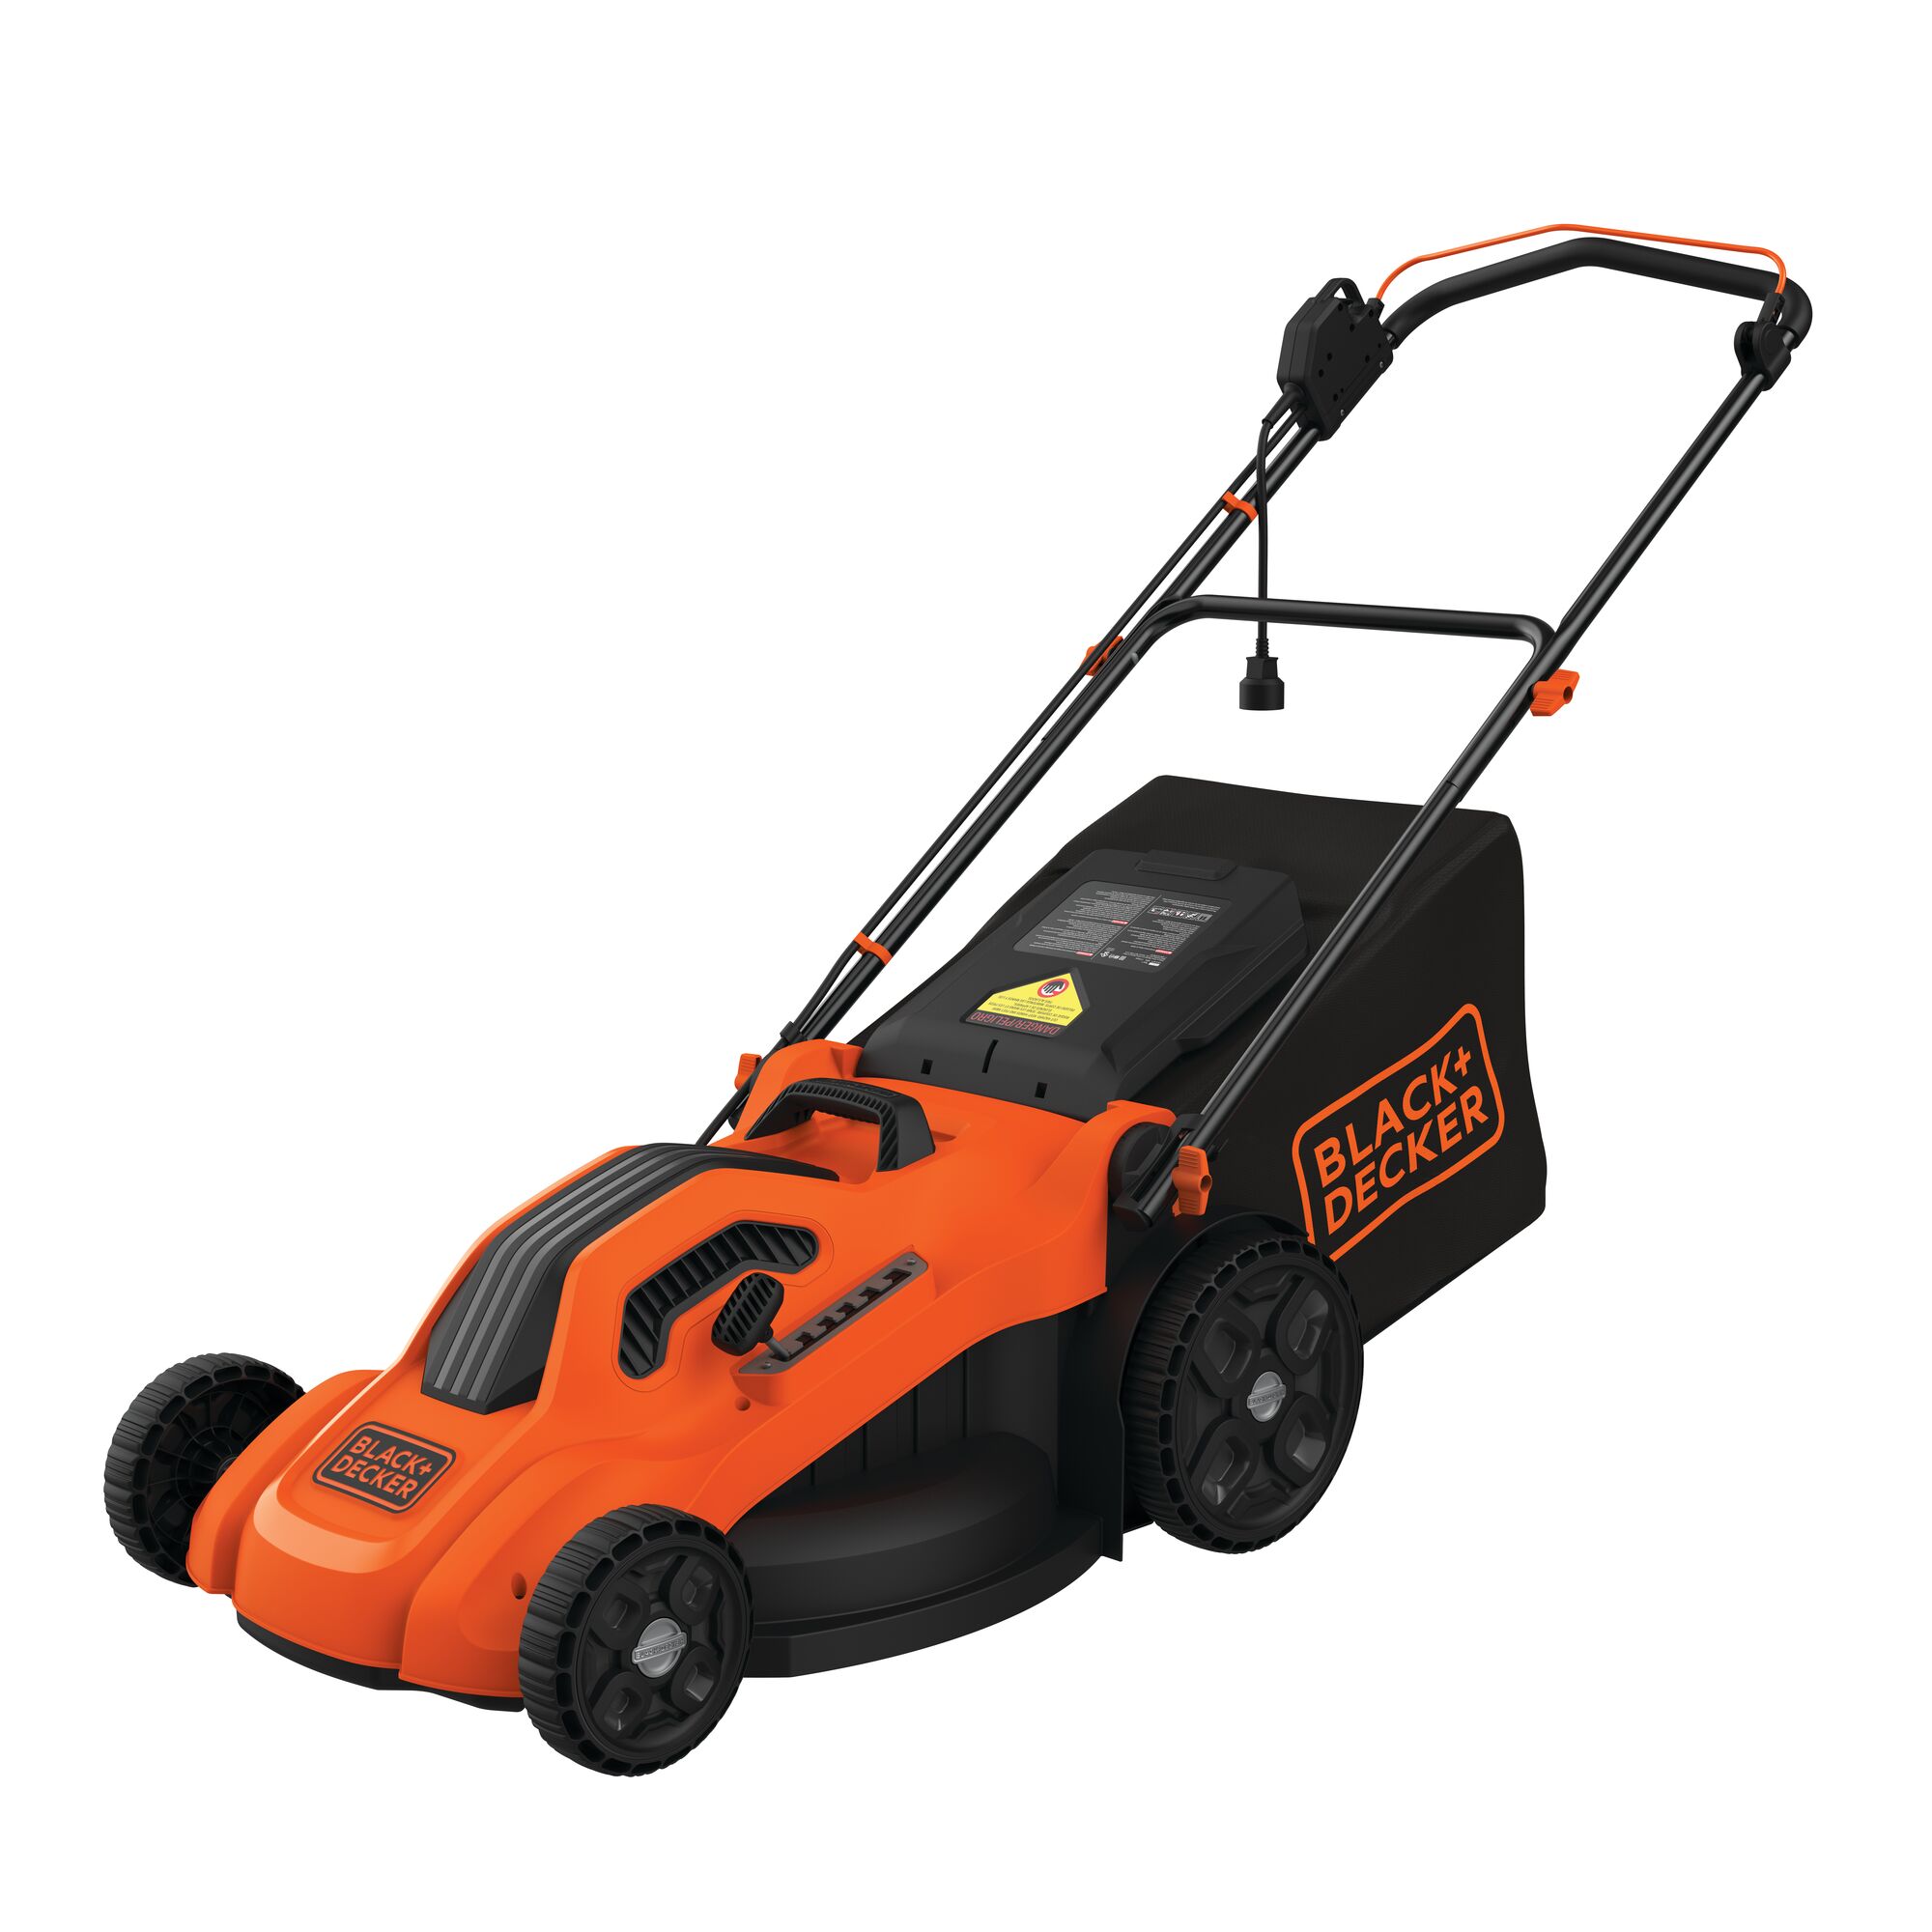 Profile of 13 ampere 20 degree corded electric lawn mower.